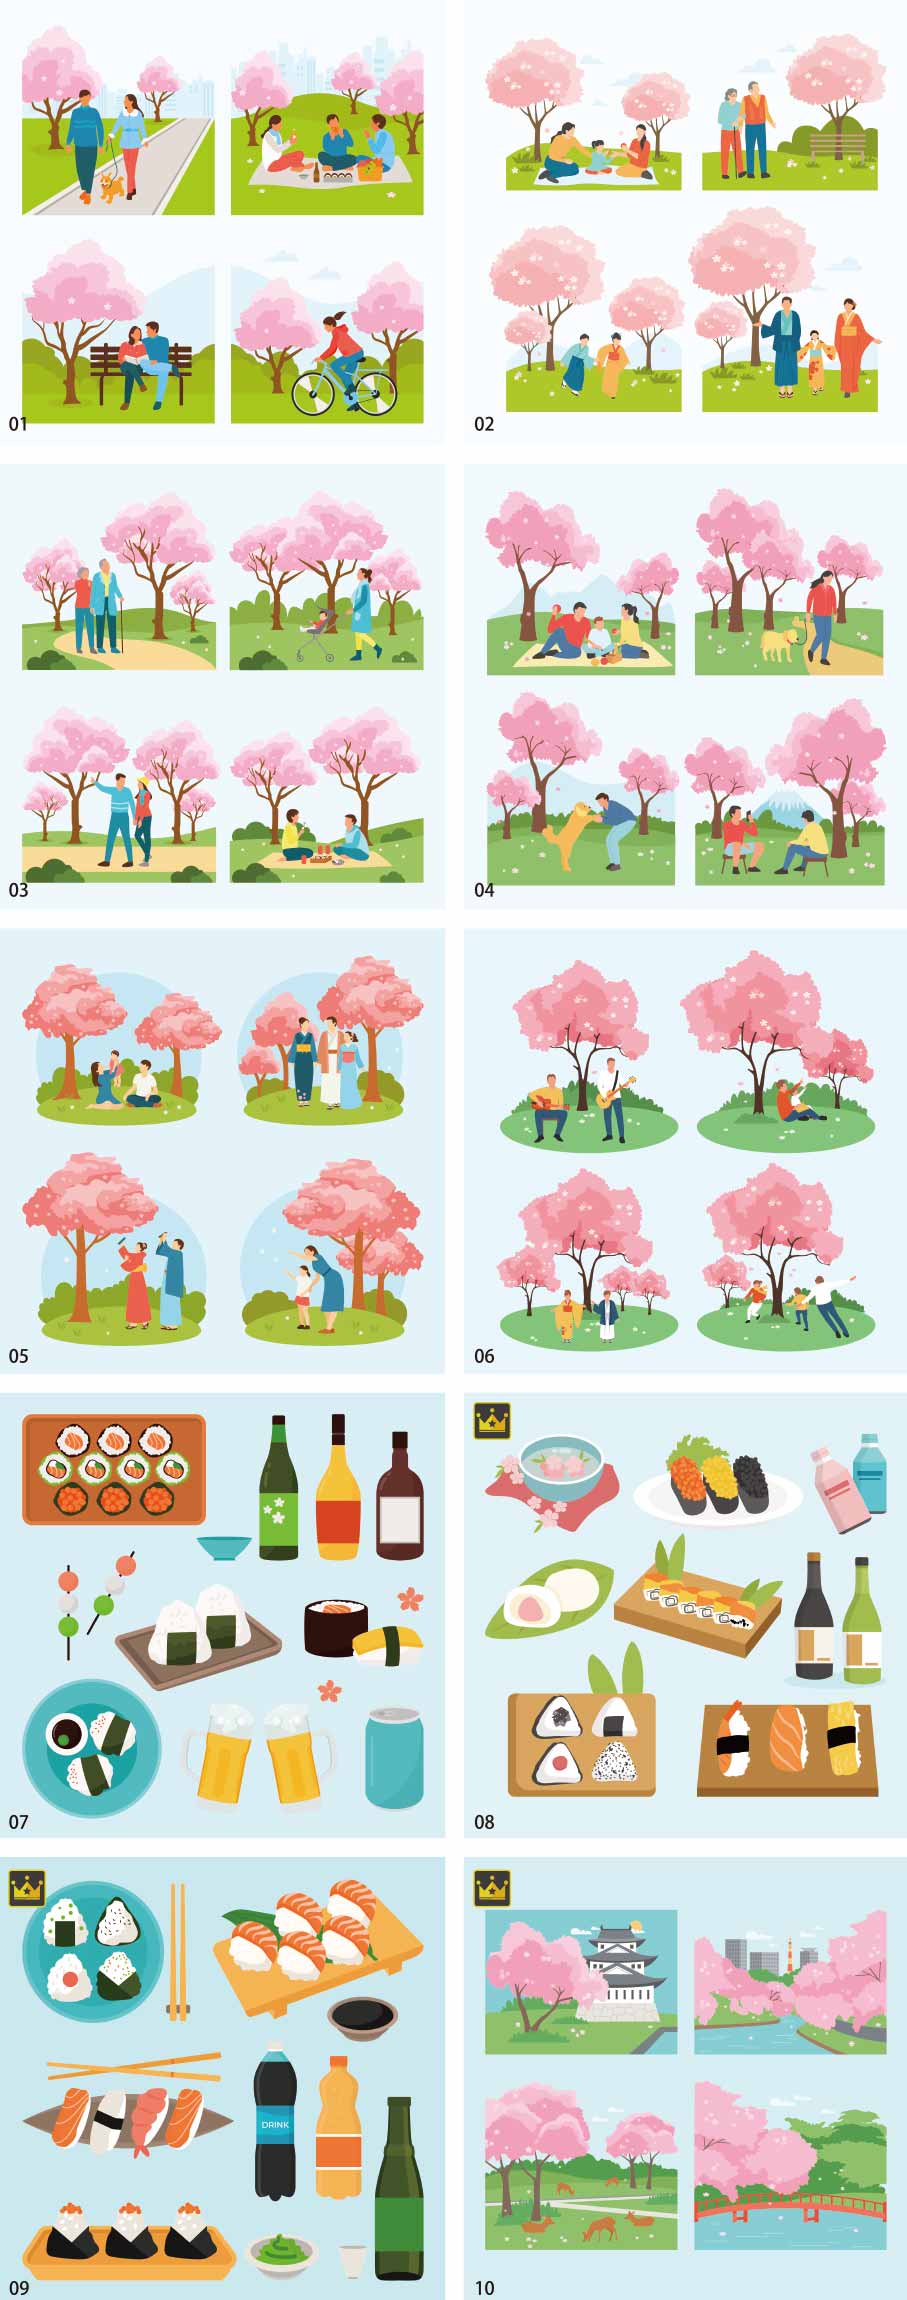 Cherry-blossom viewing illustration collection